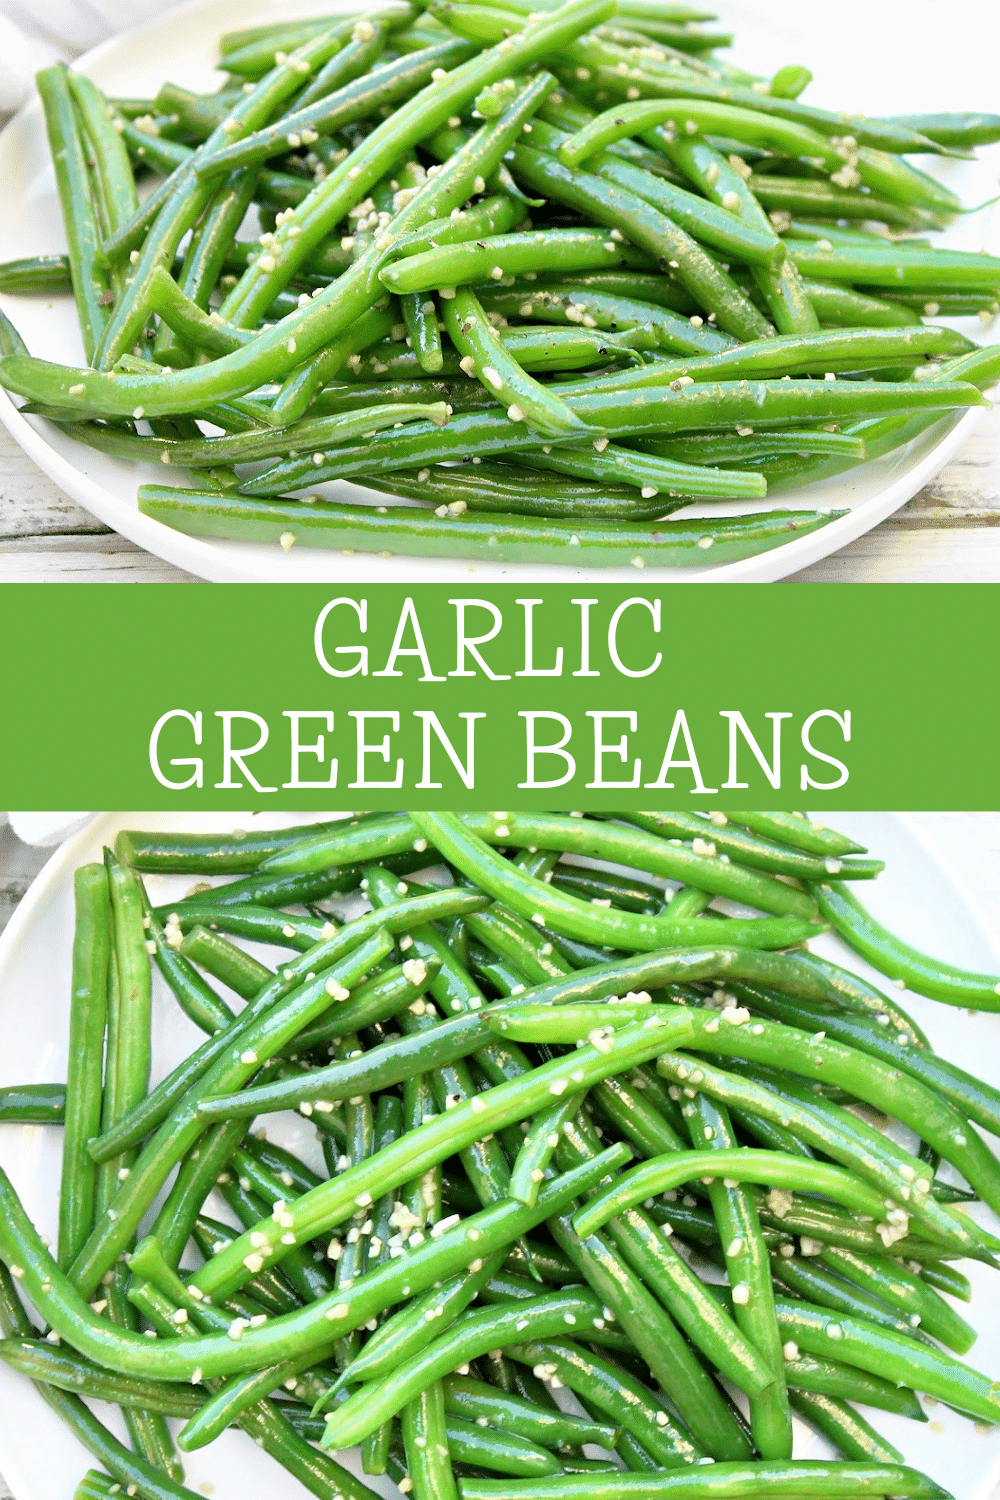 Garlic Green Beans ~ Sautéed green beans with lots of garlic and butter. An easy side dish that's ready to serve in 10 minutes! via @thiswifecooks